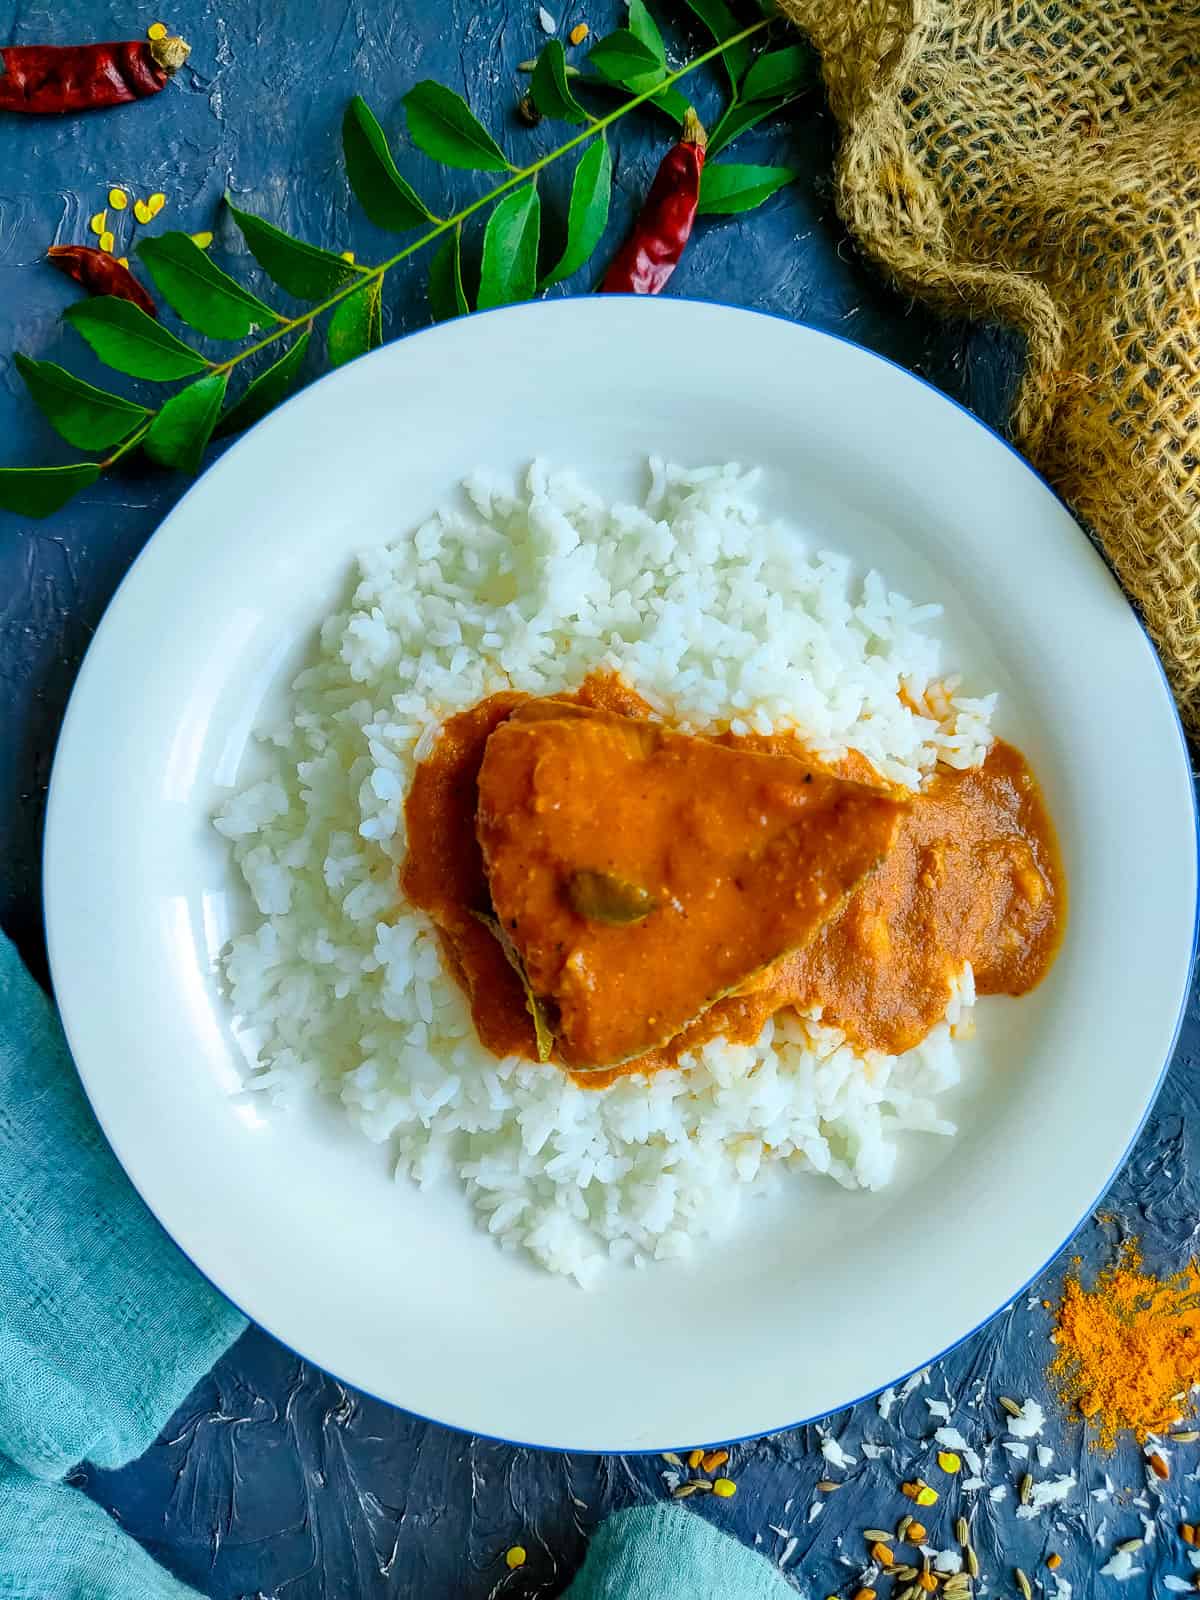 Mangalore style fish curry served with rice on a white plate.